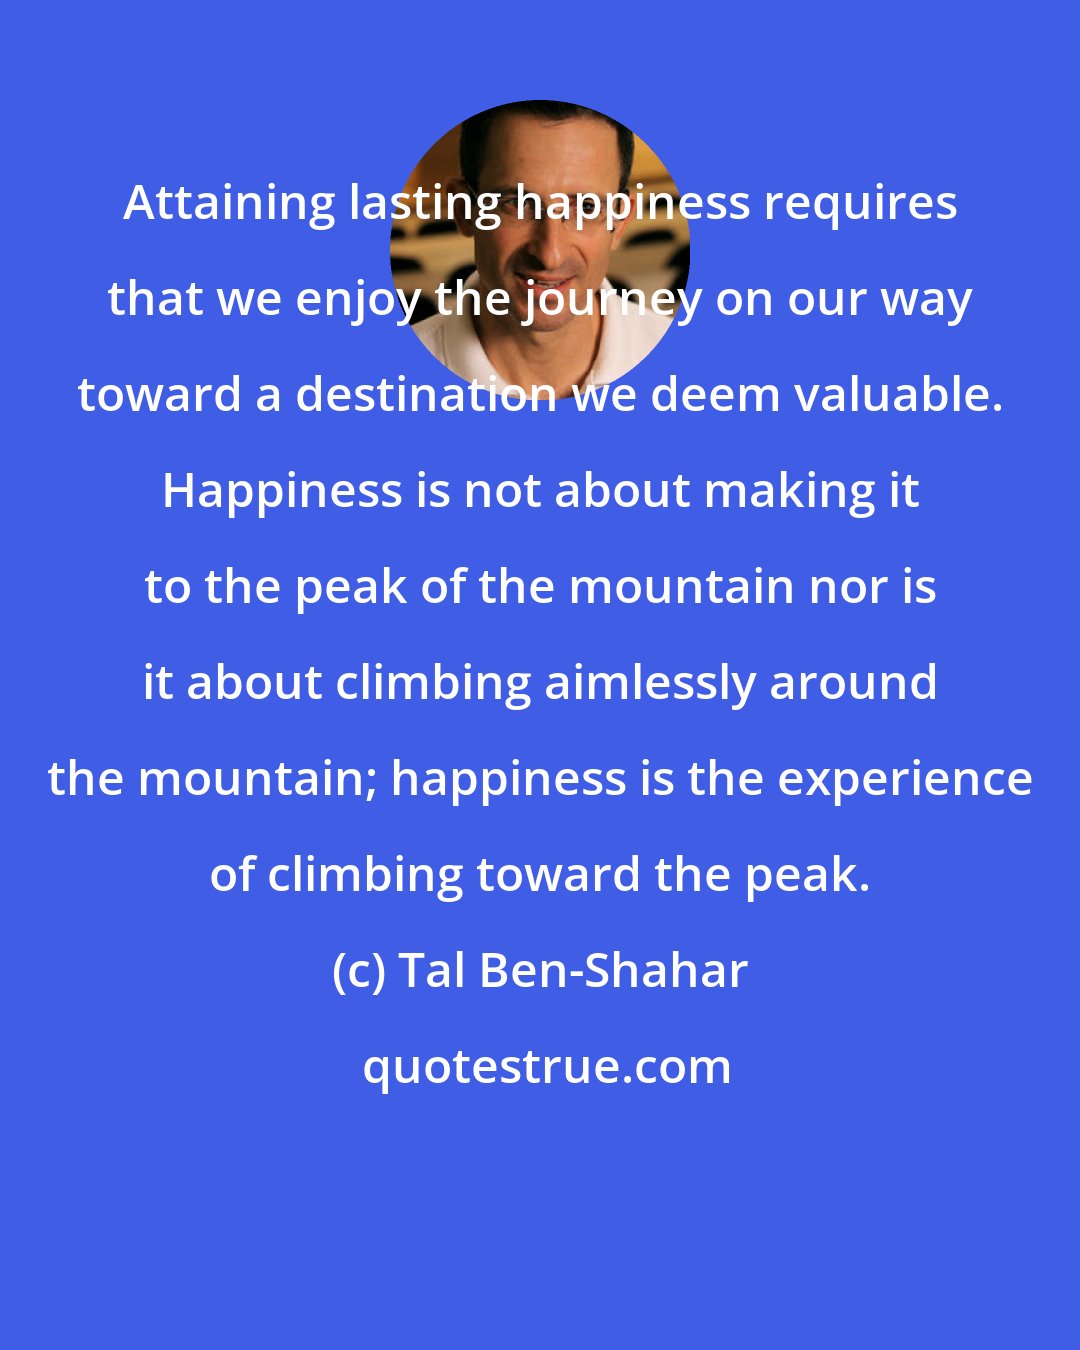 Tal Ben-Shahar: Attaining lasting happiness requires that we enjoy the journey on our way toward a destination we deem valuable. Happiness is not about making it to the peak of the mountain nor is it about climbing aimlessly around the mountain; happiness is the experience of climbing toward the peak.